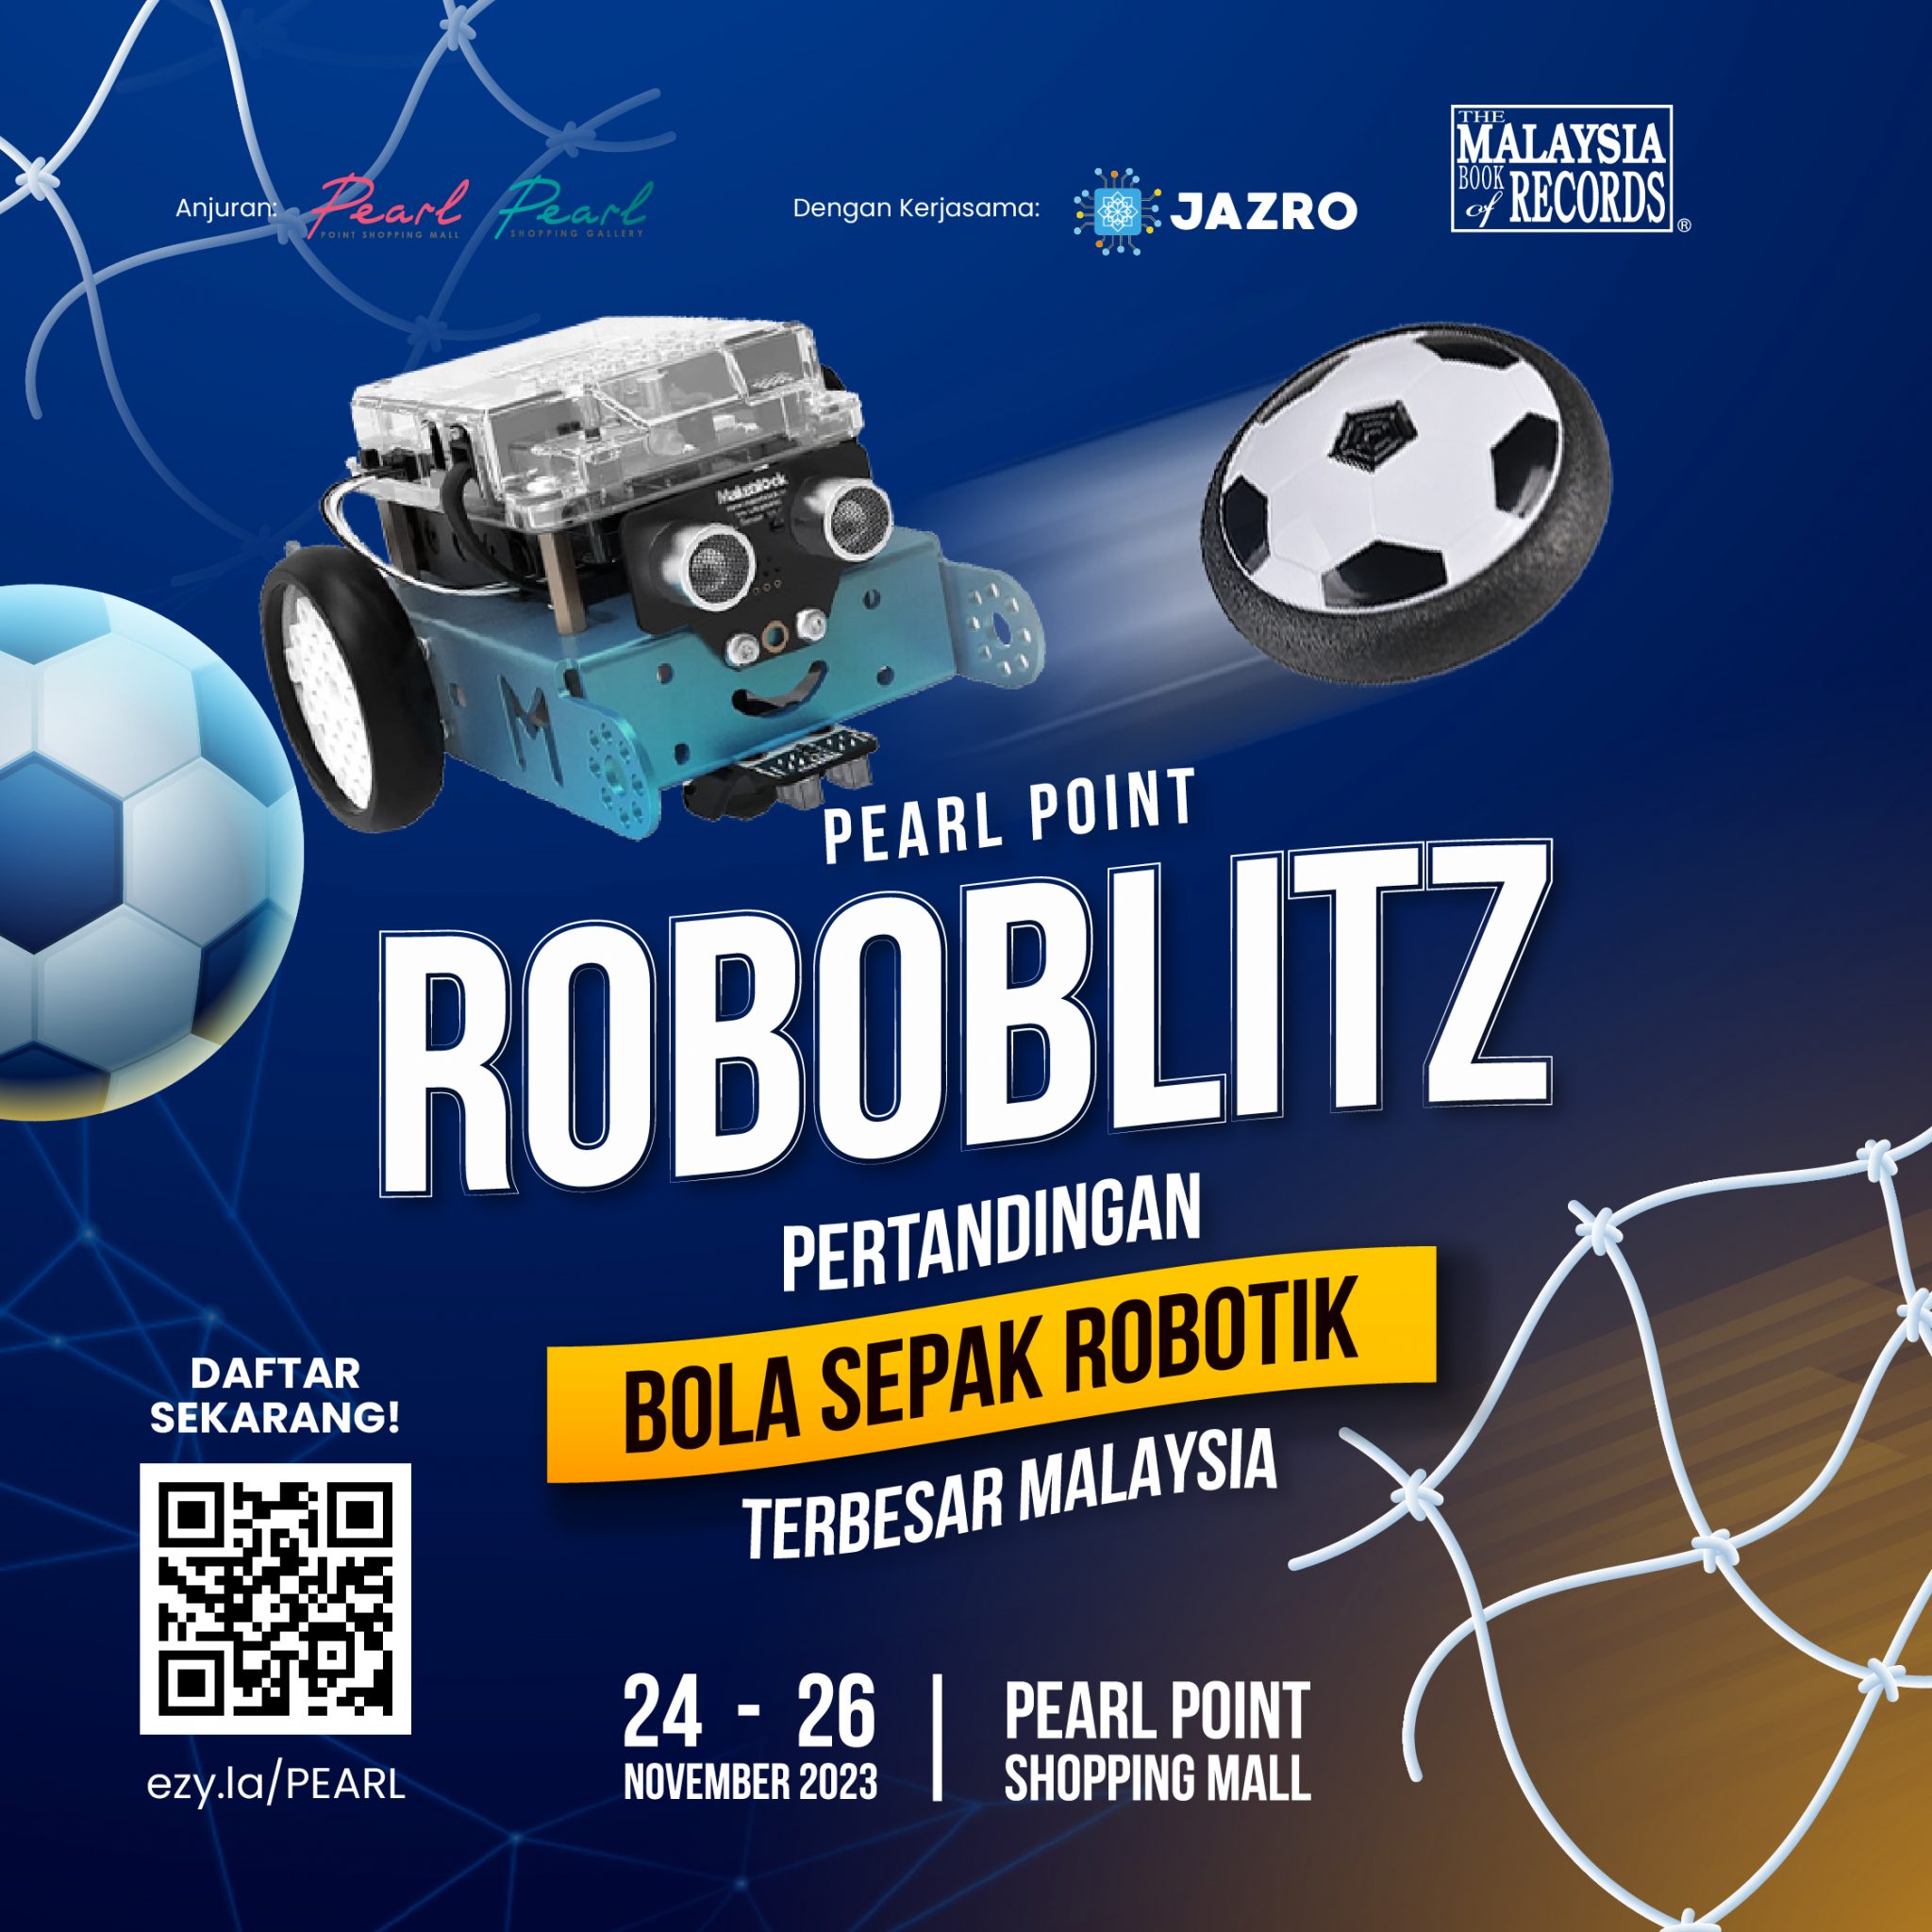 JAZRO and Pearl Point Shopping Mall host RoboBlitz soccer